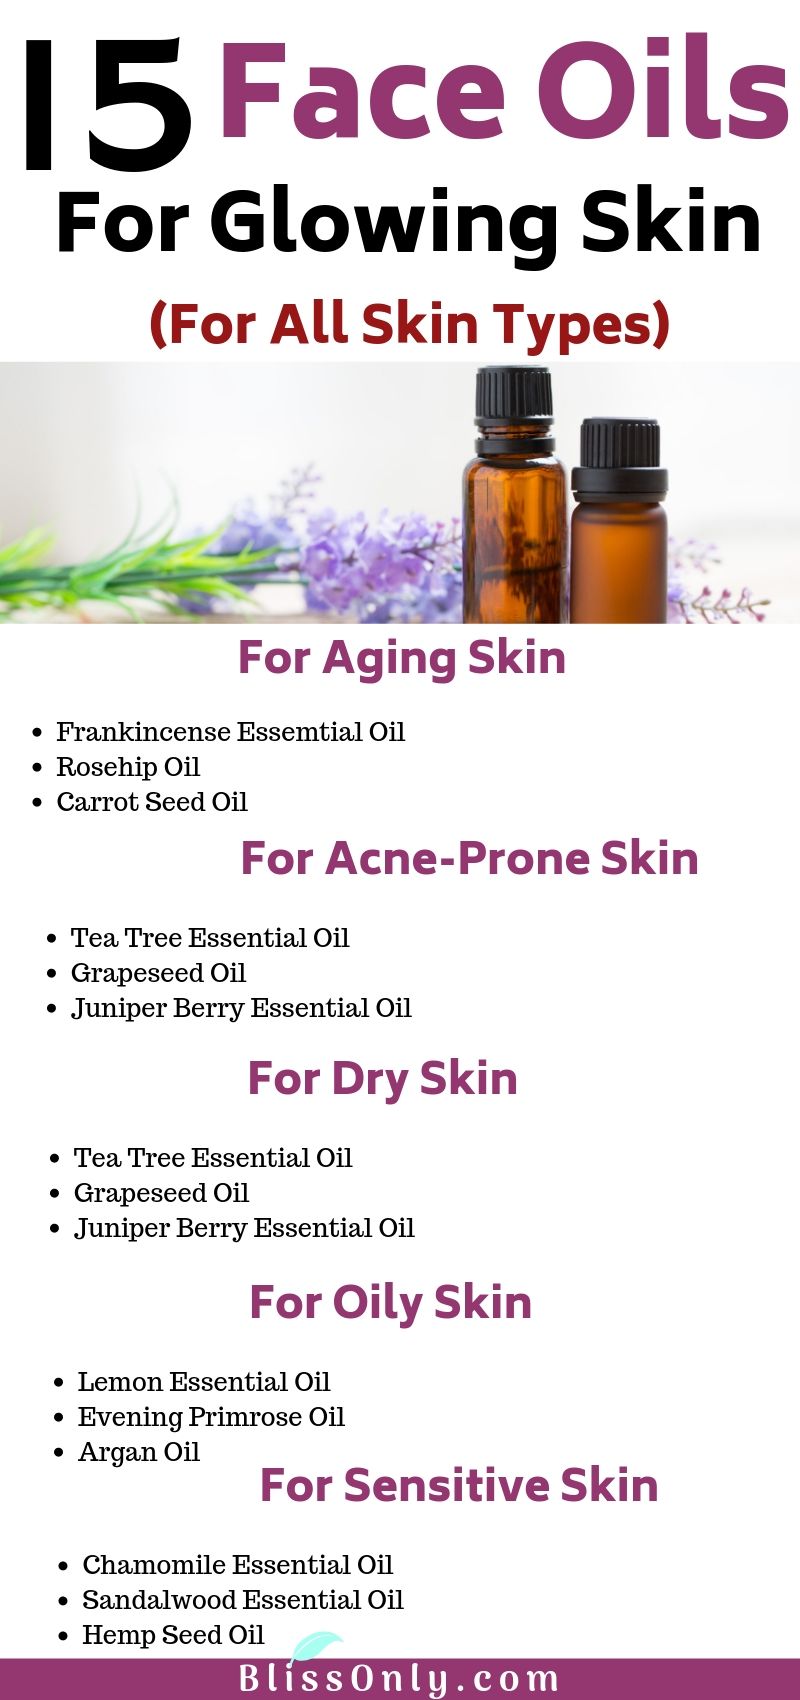 face oil for glowing skin